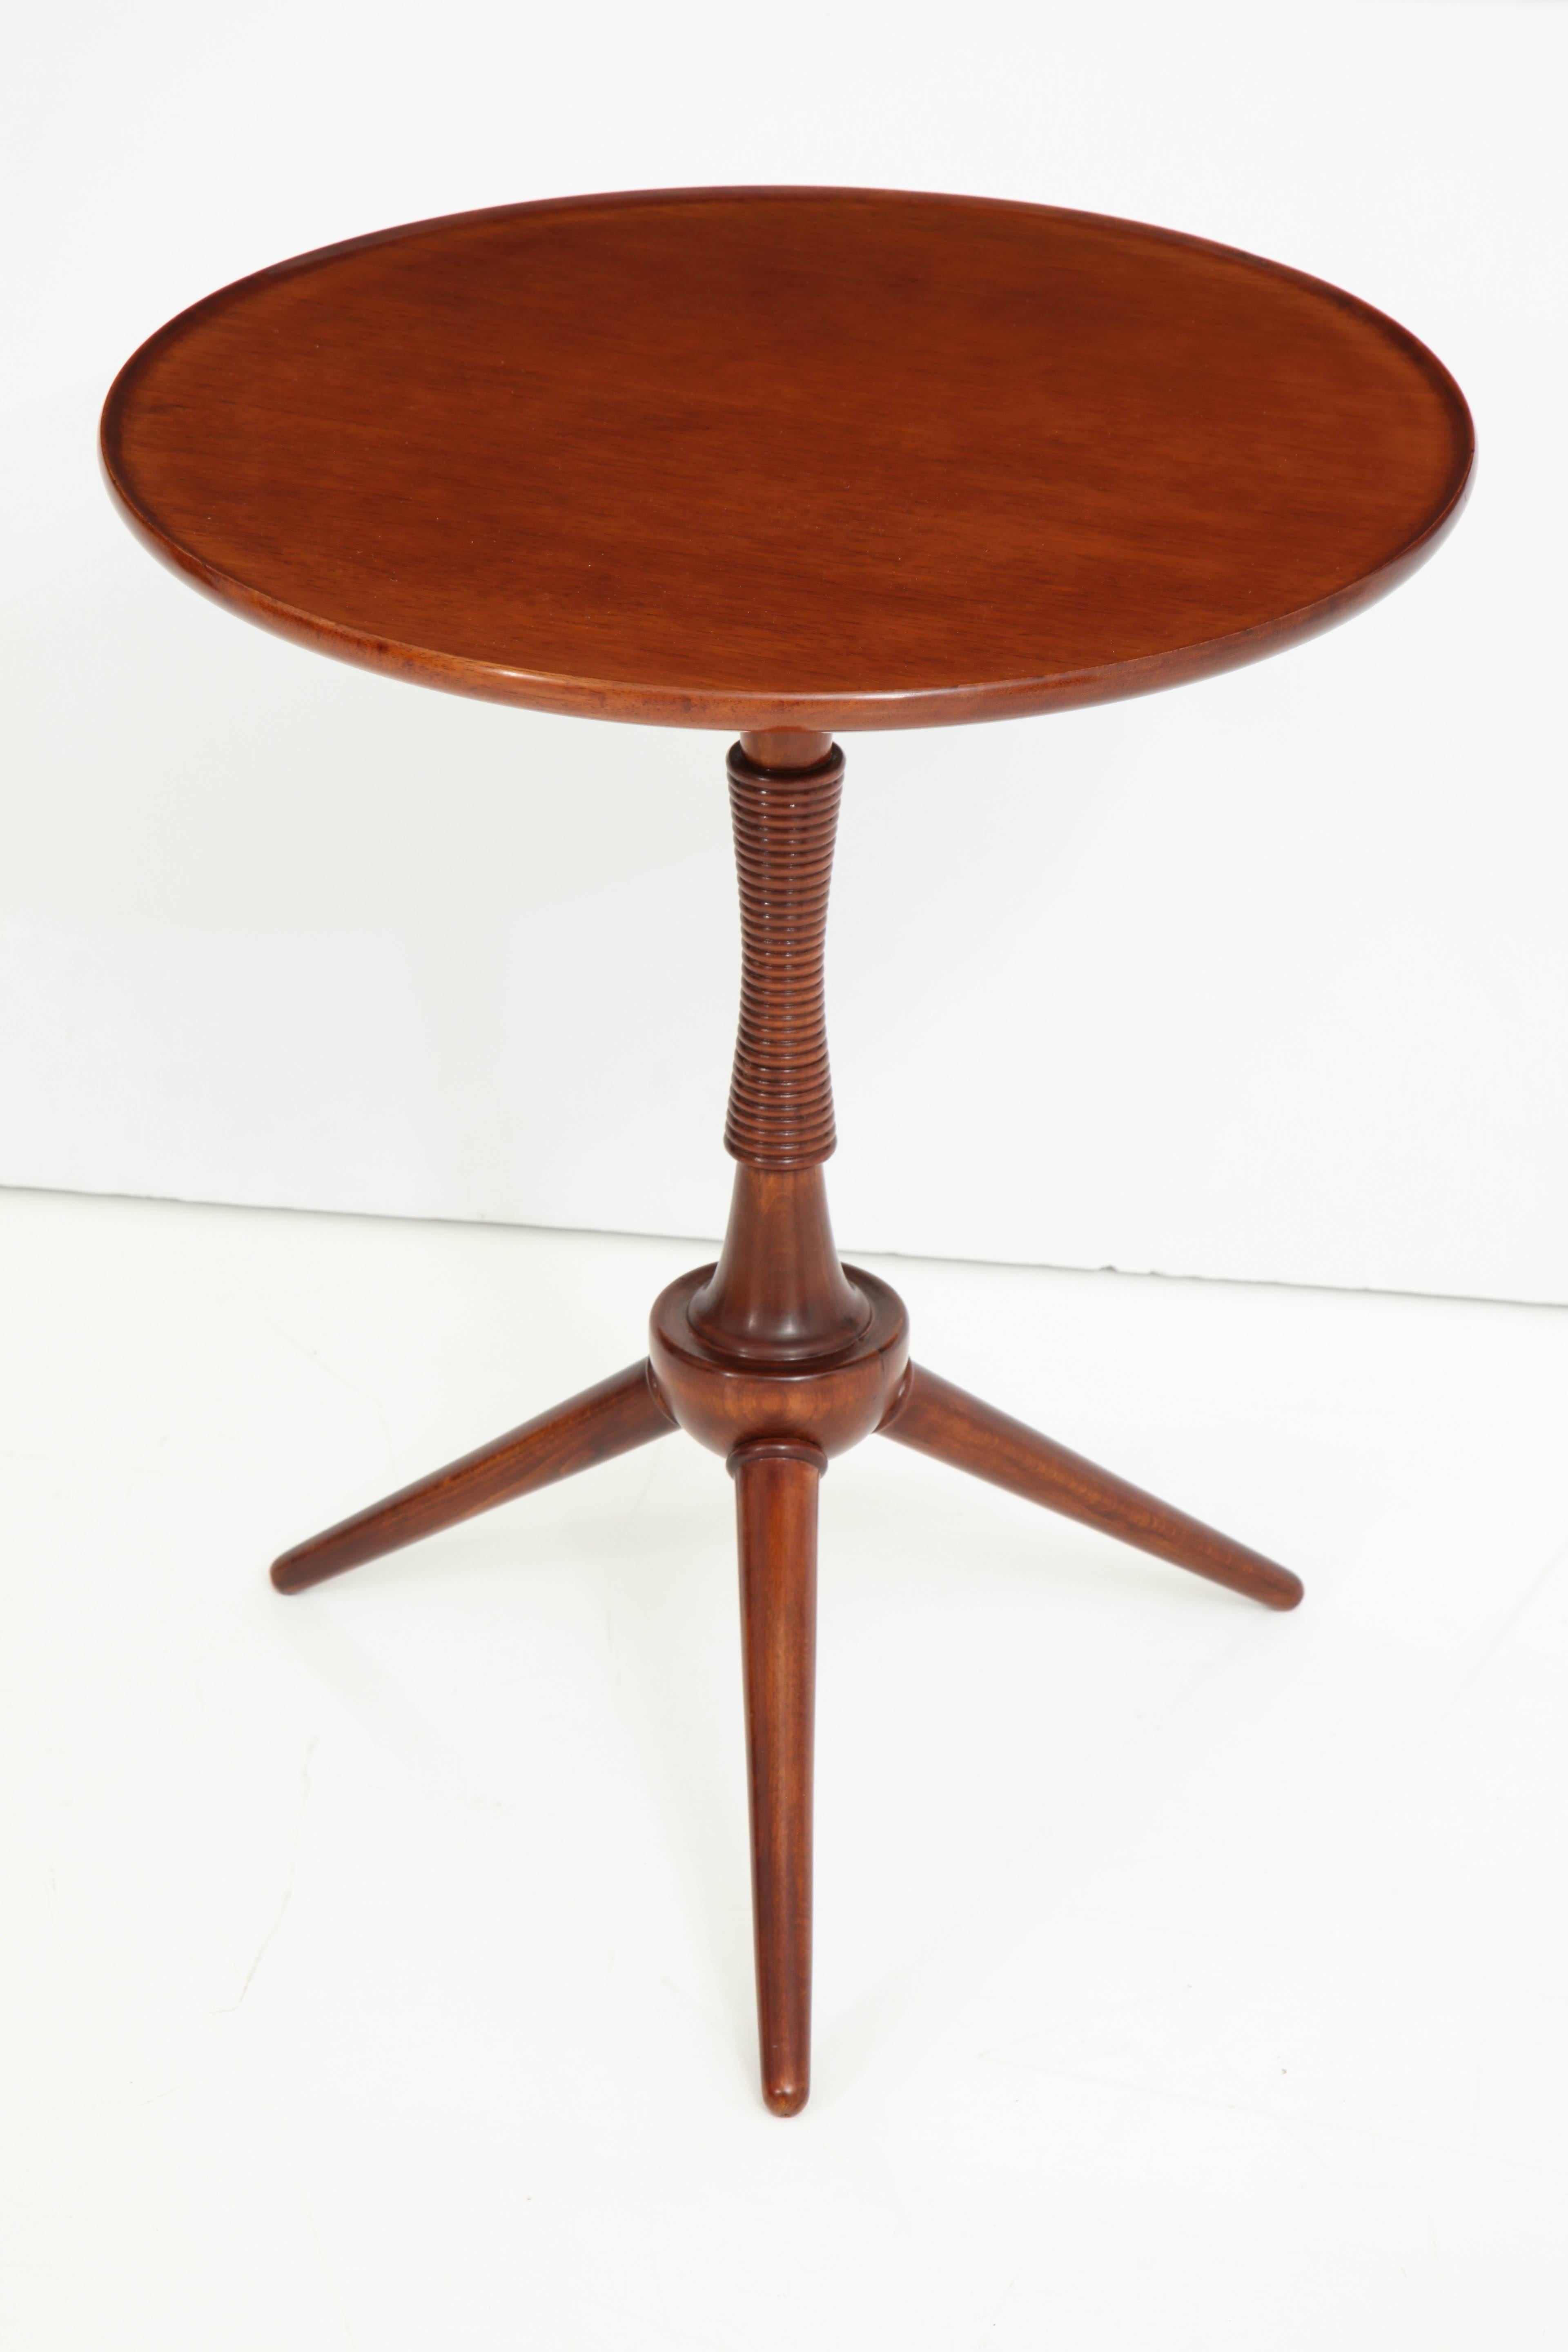 A Danish mahogany tripod table, circa 1940s, designed and produced by Frits Henningsen, with a circular lipped top raised on a partially spool turned tapered and spreading stem ending with three circular tapered legs.
   